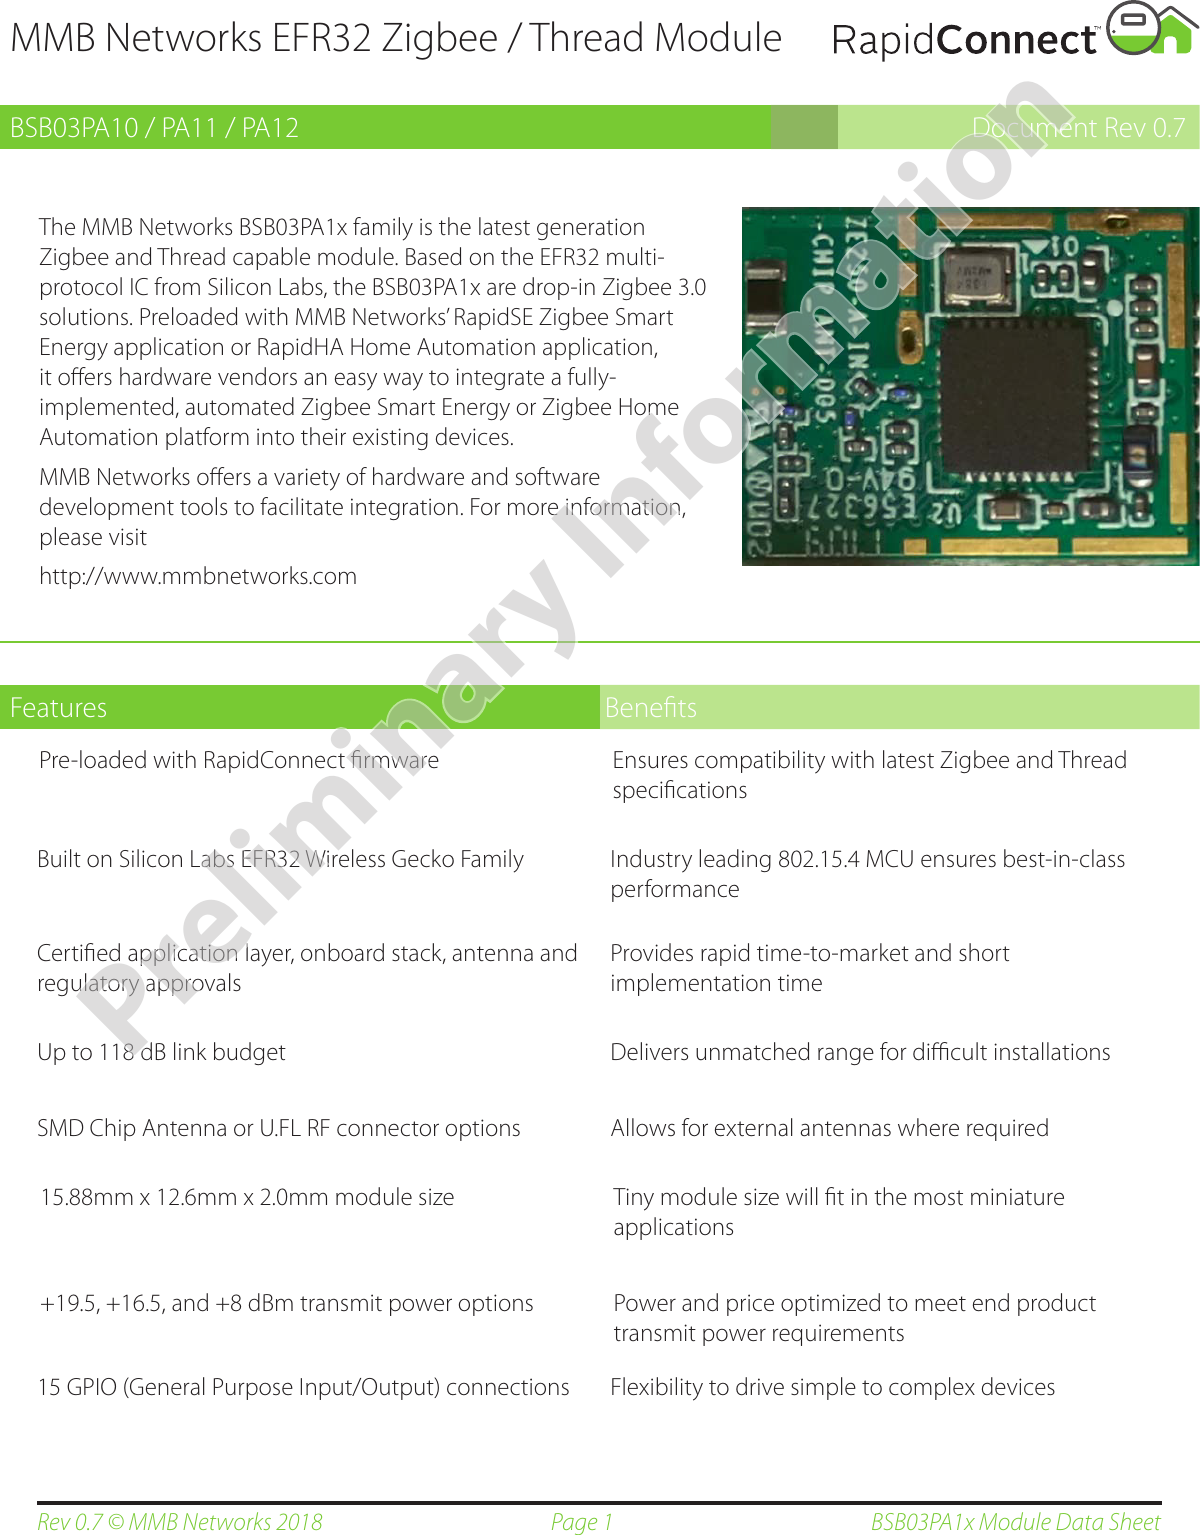 Page 1Rev 0.7 © MMB Networks 2018 BSB03PA1x Module Data SheetPre-loaded with RapidConnect ﬁrmware Ensures compatibility with latest Zigbee and Thread speciﬁcationsMMB Networks EFR32 Zigbee / Thread ModuleBSB03PA10 / PA11 / PA12 Document Rev 0.7The MMB Networks BSB03PA1x family is the latest generation Zigbee and Thread capable module. Based on the EFR32 multi-protocol IC from Silicon Labs, the BSB03PA1x are drop-in Zigbee 3.0 solutions. Preloaded with MMB Networks’ RapidSE Zigbee Smart Energy application or RapidHA Home Automation application, it oﬀers hardware vendors an easy way to integrate a fully-implemented, automated Zigbee Smart Energy or Zigbee Home Automation platform into their existing devices.MMB Networks oﬀers a variety of hardware and software development tools to facilitate integration. For more information, please visit            http://www.mmbnetworks.comFeatures Beneﬁts+19.5, +16.5, and +8 dBm transmit power options Power and price optimized to meet end product transmit power requirementsBuilt on Silicon Labs EFR32 Wireless Gecko Family Industry leading 802.15.4 MCU ensures best-in-class performanceCertiﬁed application layer, onboard stack, antenna and regulatory approvalsProvides rapid time-to-market and short implementation timeUp to 118 dB link budget Delivers unmatched range for diﬃcult installationsSMD Chip Antenna or U.FL RF connector options Allows for external antennas where required15.88mm x 12.6mm x 2.0mm module size Tiny module size will ﬁt in the most miniature applications15 GPIO (General Purpose Input/Output) connections Flexibility to drive simple to complex devicesPreliminary Information